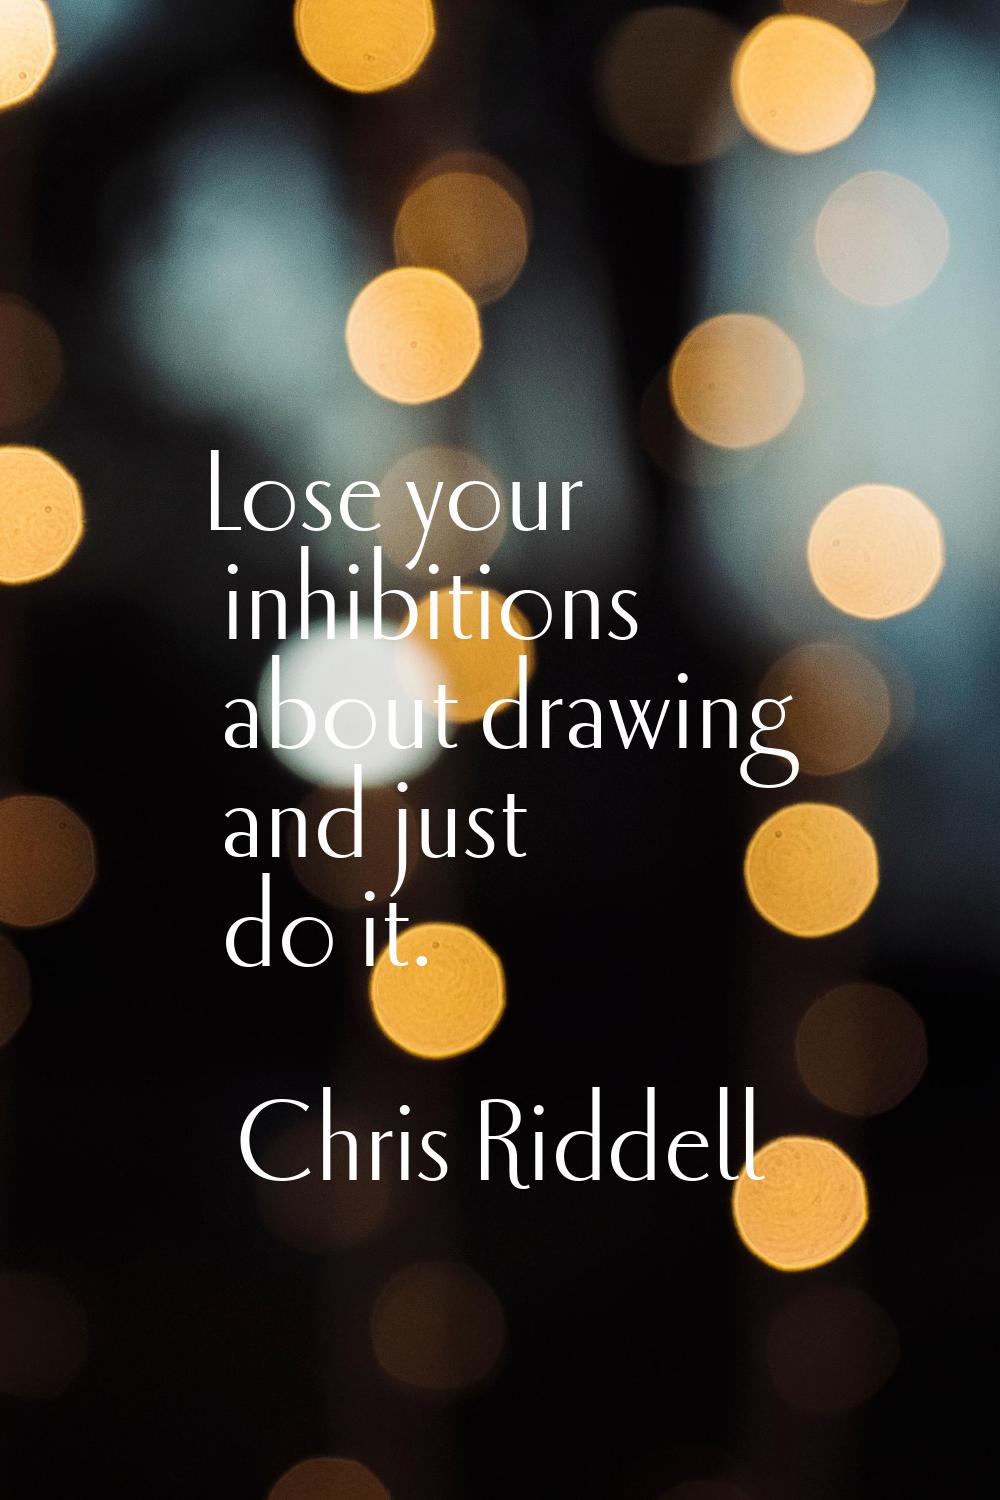 Lose your inhibitions about drawing and just do it.